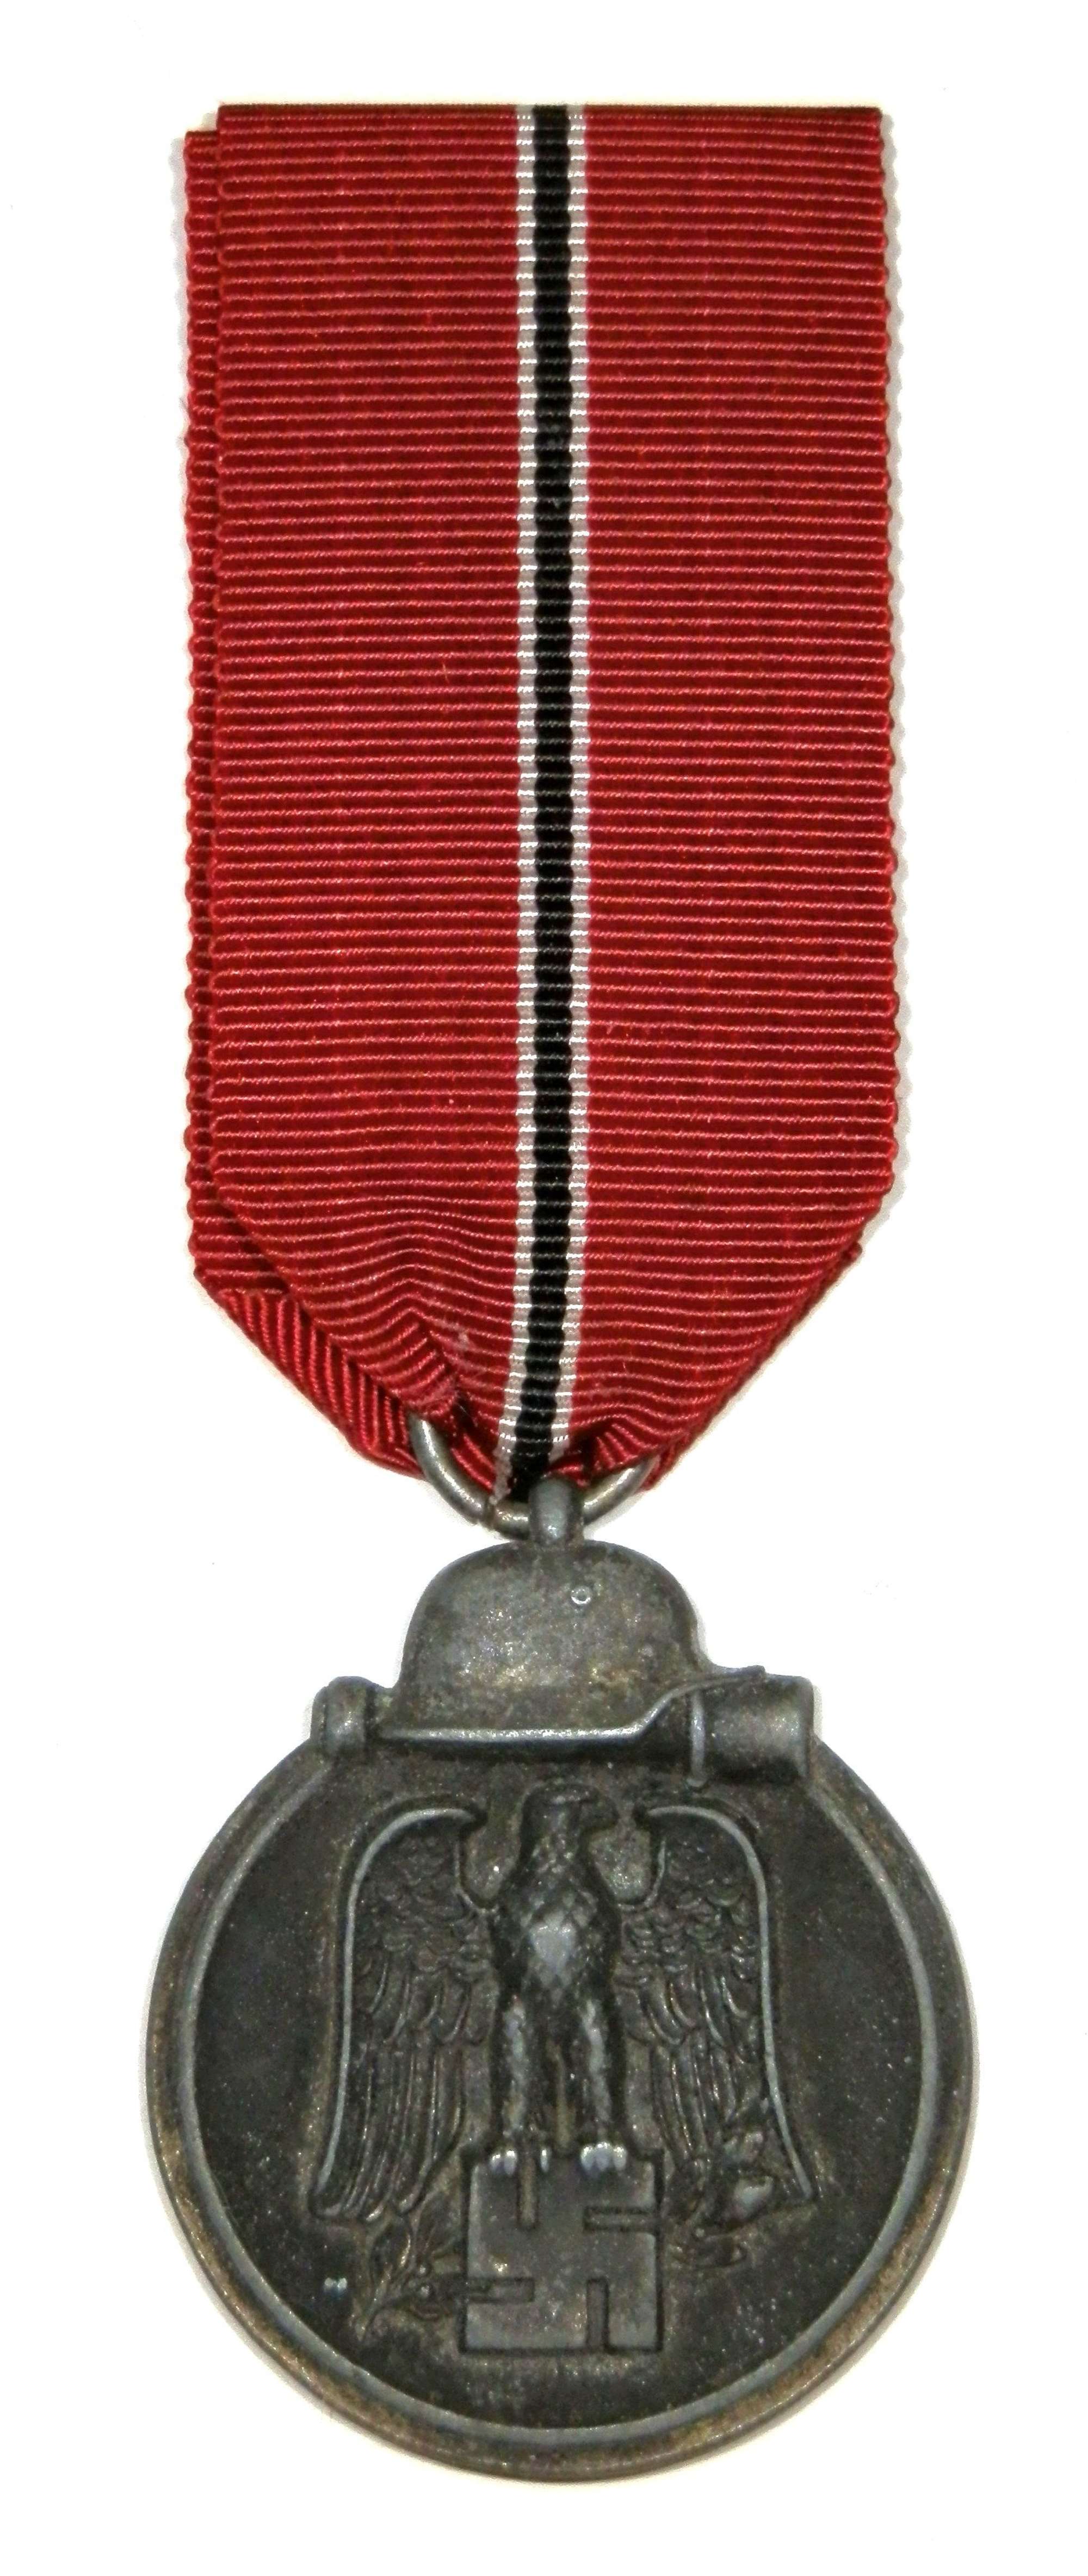 Winter Campaign Medal Russia 1941-42. (Eastern Front Medal) Marked 88